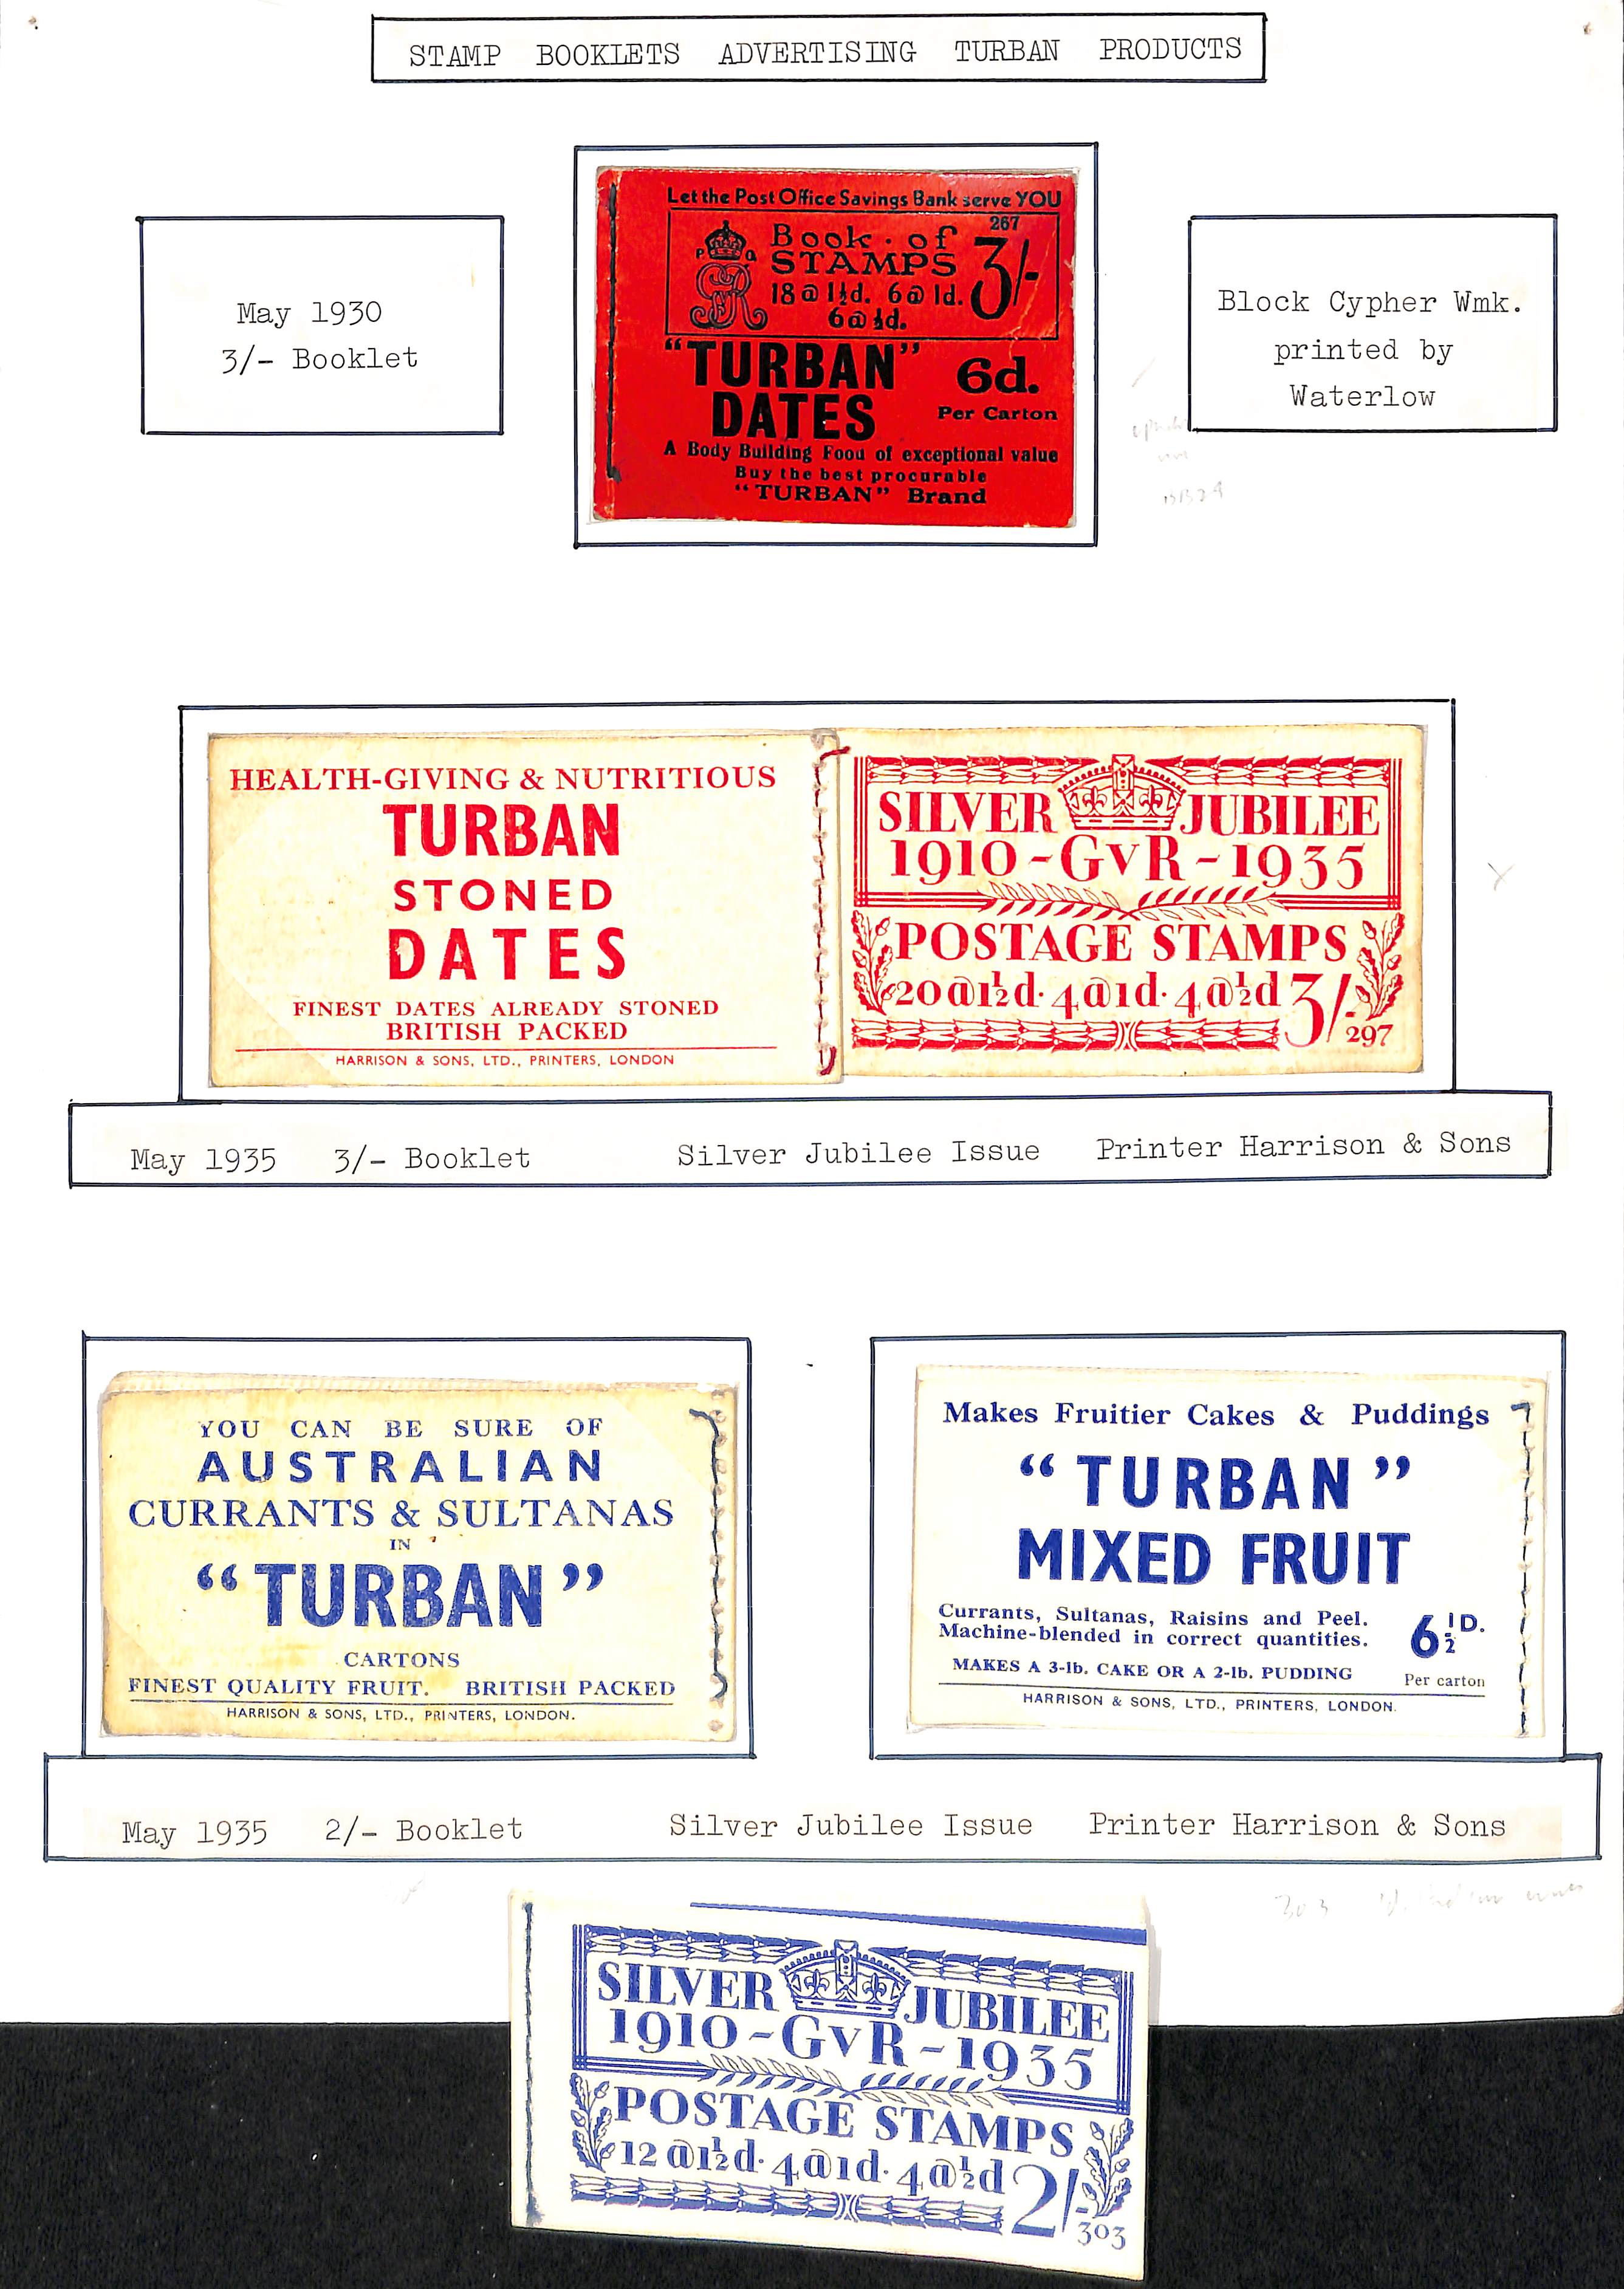 Booklets. 1930-35 KGV Booklets all with adverts for "Turban" dates or mixed fruit on the front or - Image 3 of 3